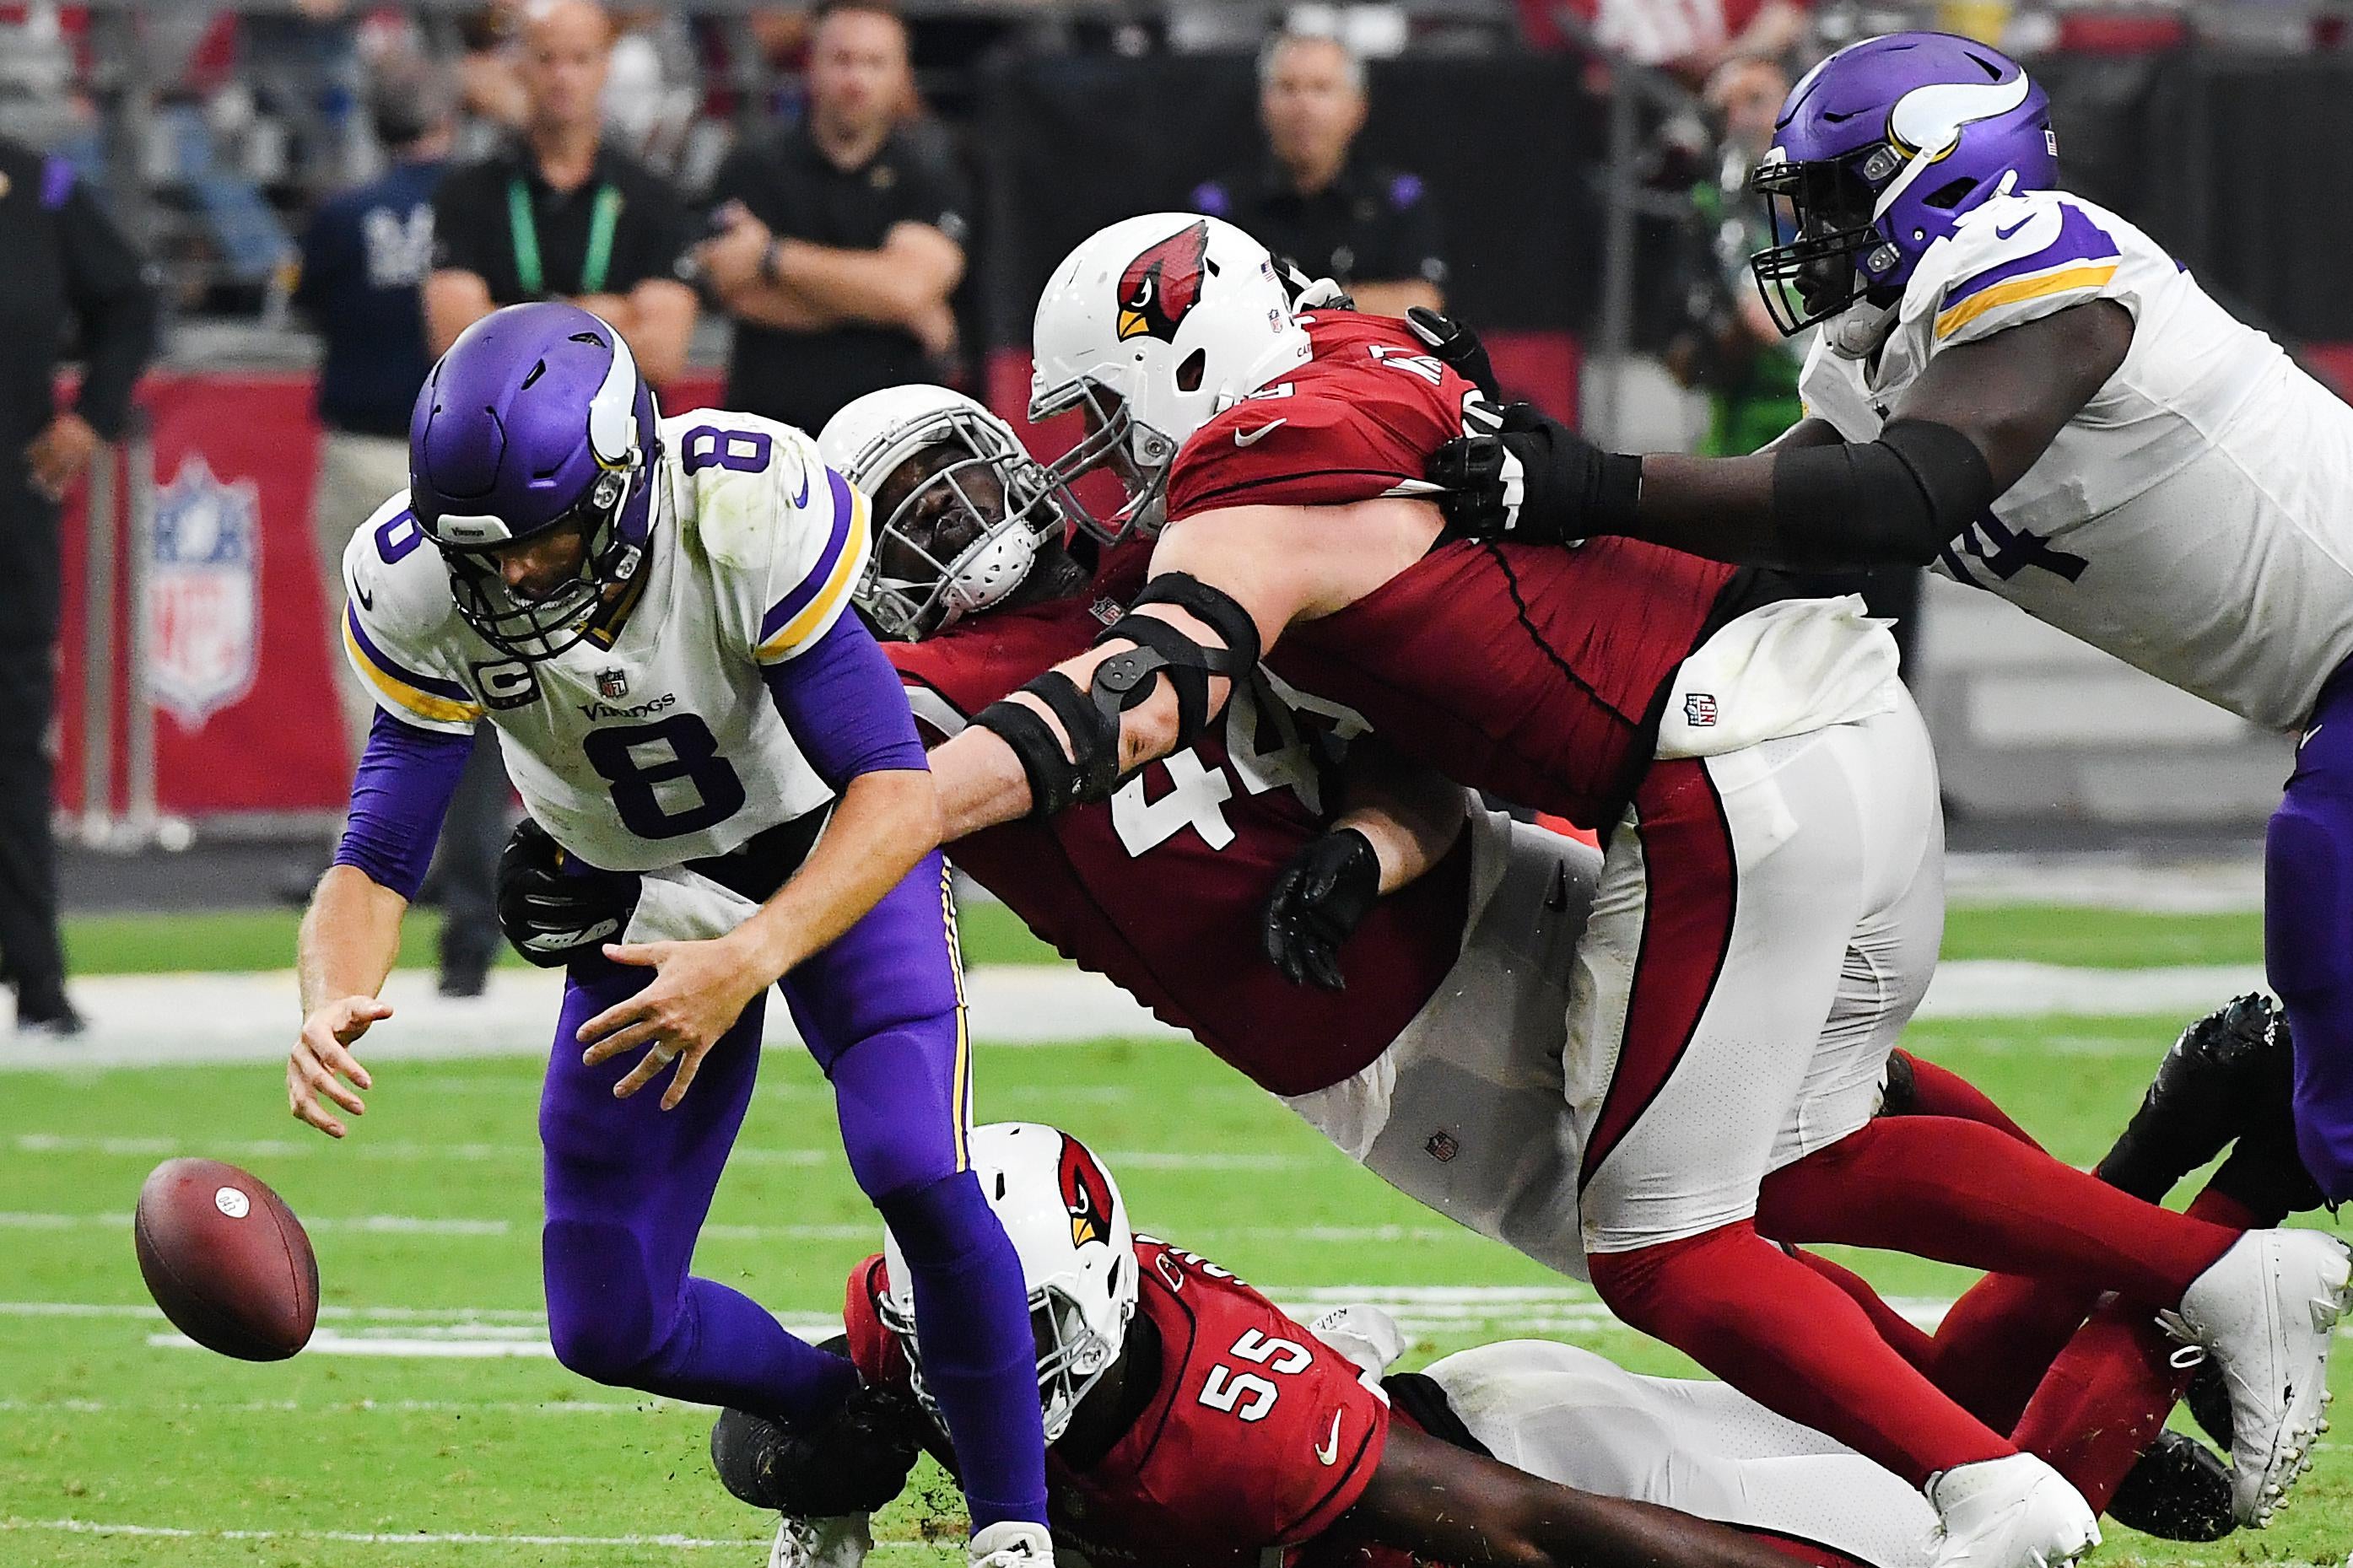 Cousins staring at the football on the ground that's been knocked out of his hands as three giant Cardinals envelop him.